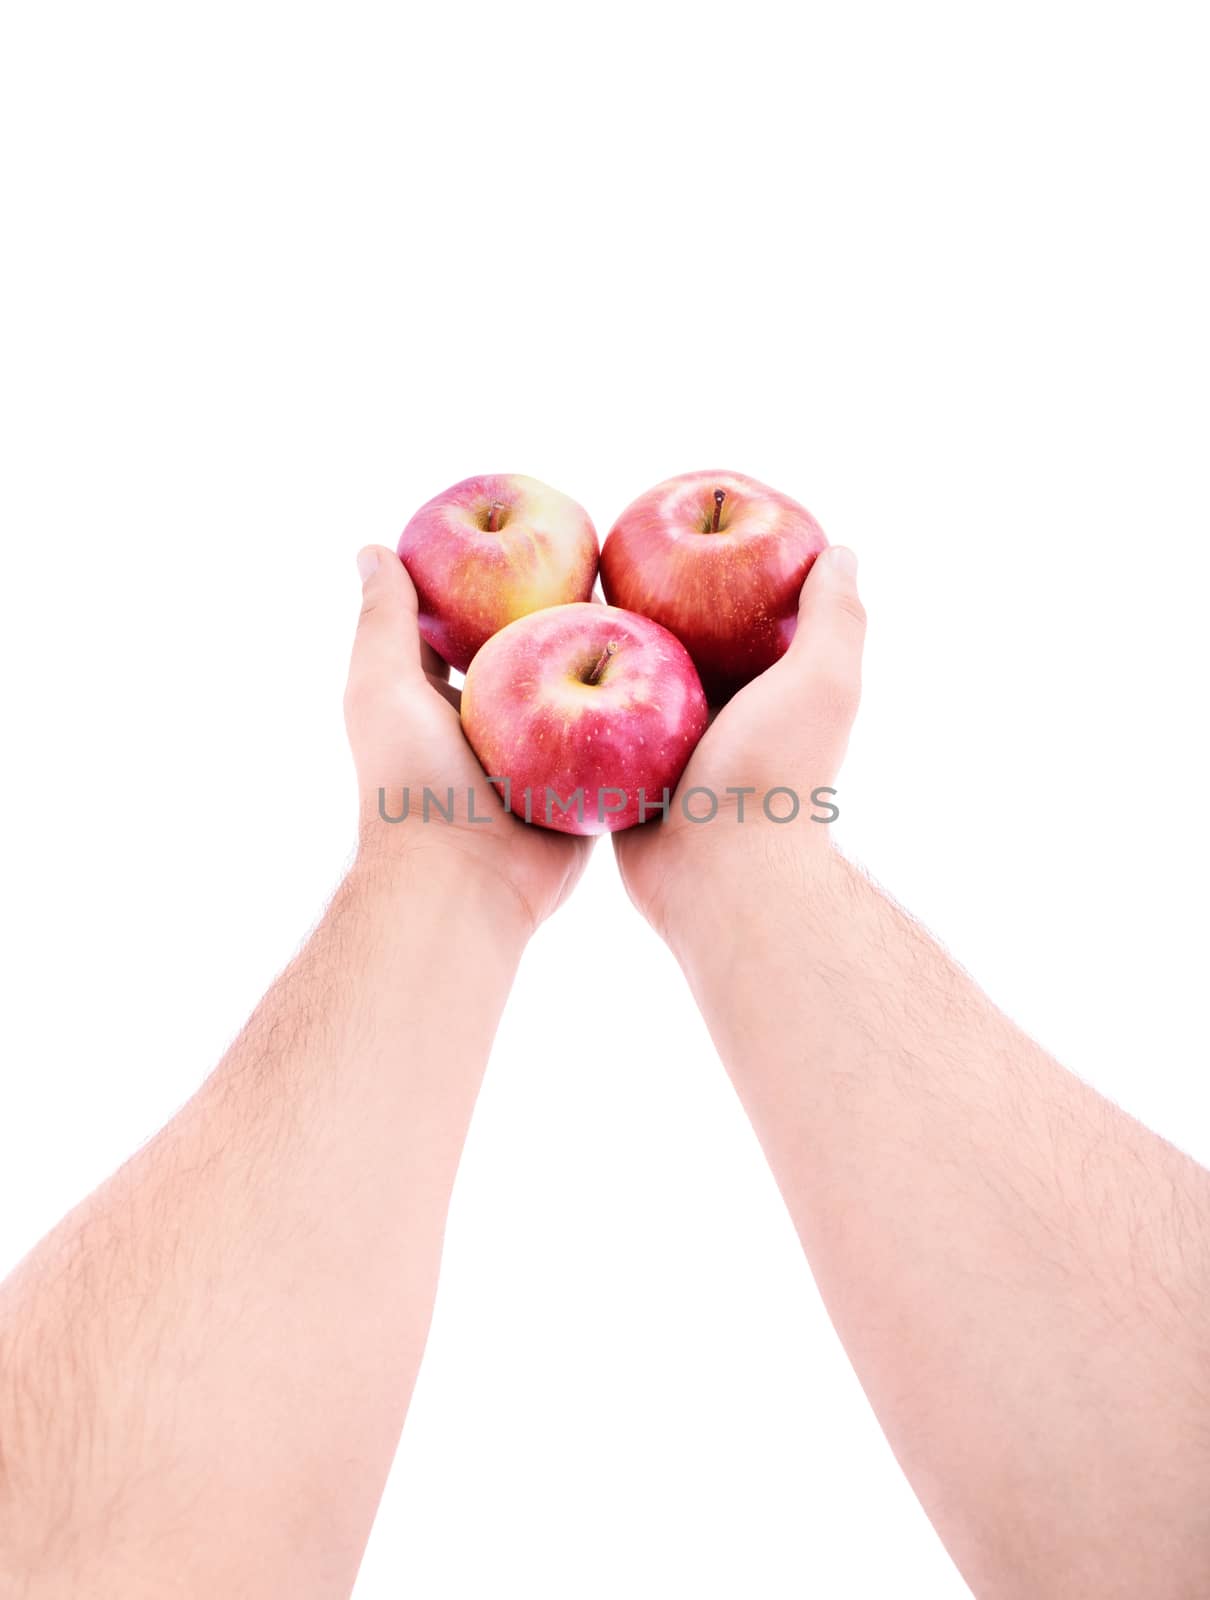 Stretched out hands offering red apples by Mendelex